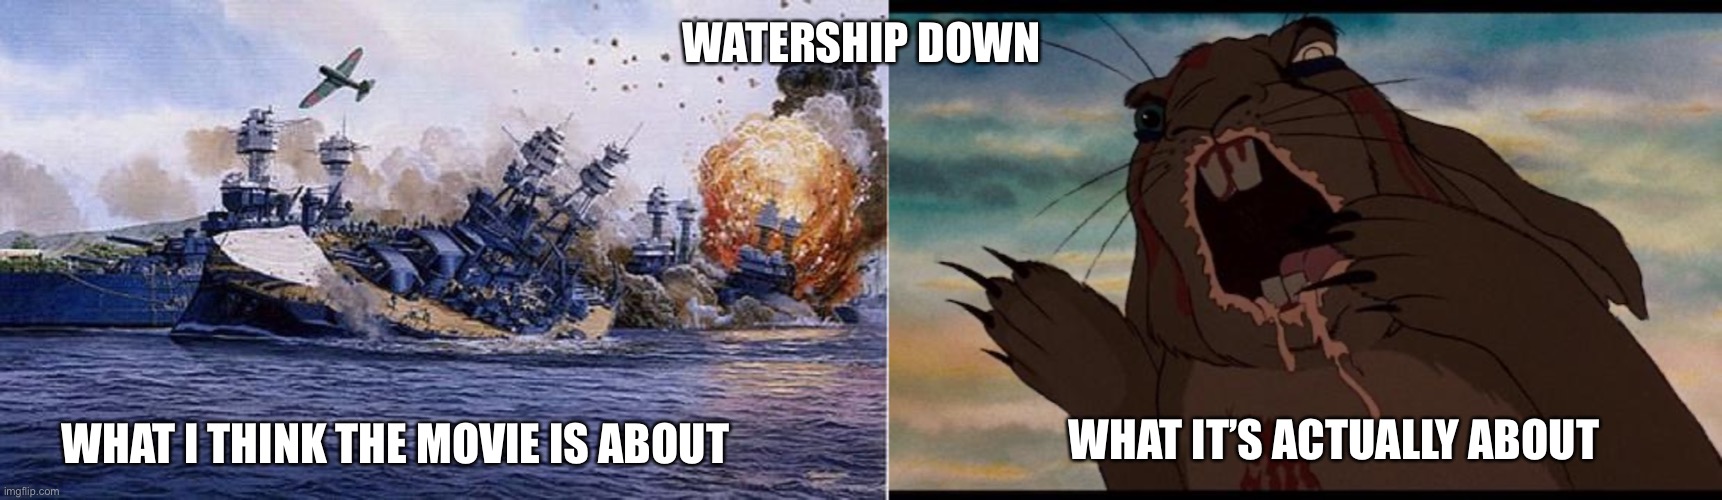 Watership Down would be the perfect name for a war movie | WATERSHIP DOWN; WHAT I THINK THE MOVIE IS ABOUT; WHAT IT’S ACTUALLY ABOUT | image tagged in watership down,movies,rabbits,battleship,war,ocean | made w/ Imgflip meme maker